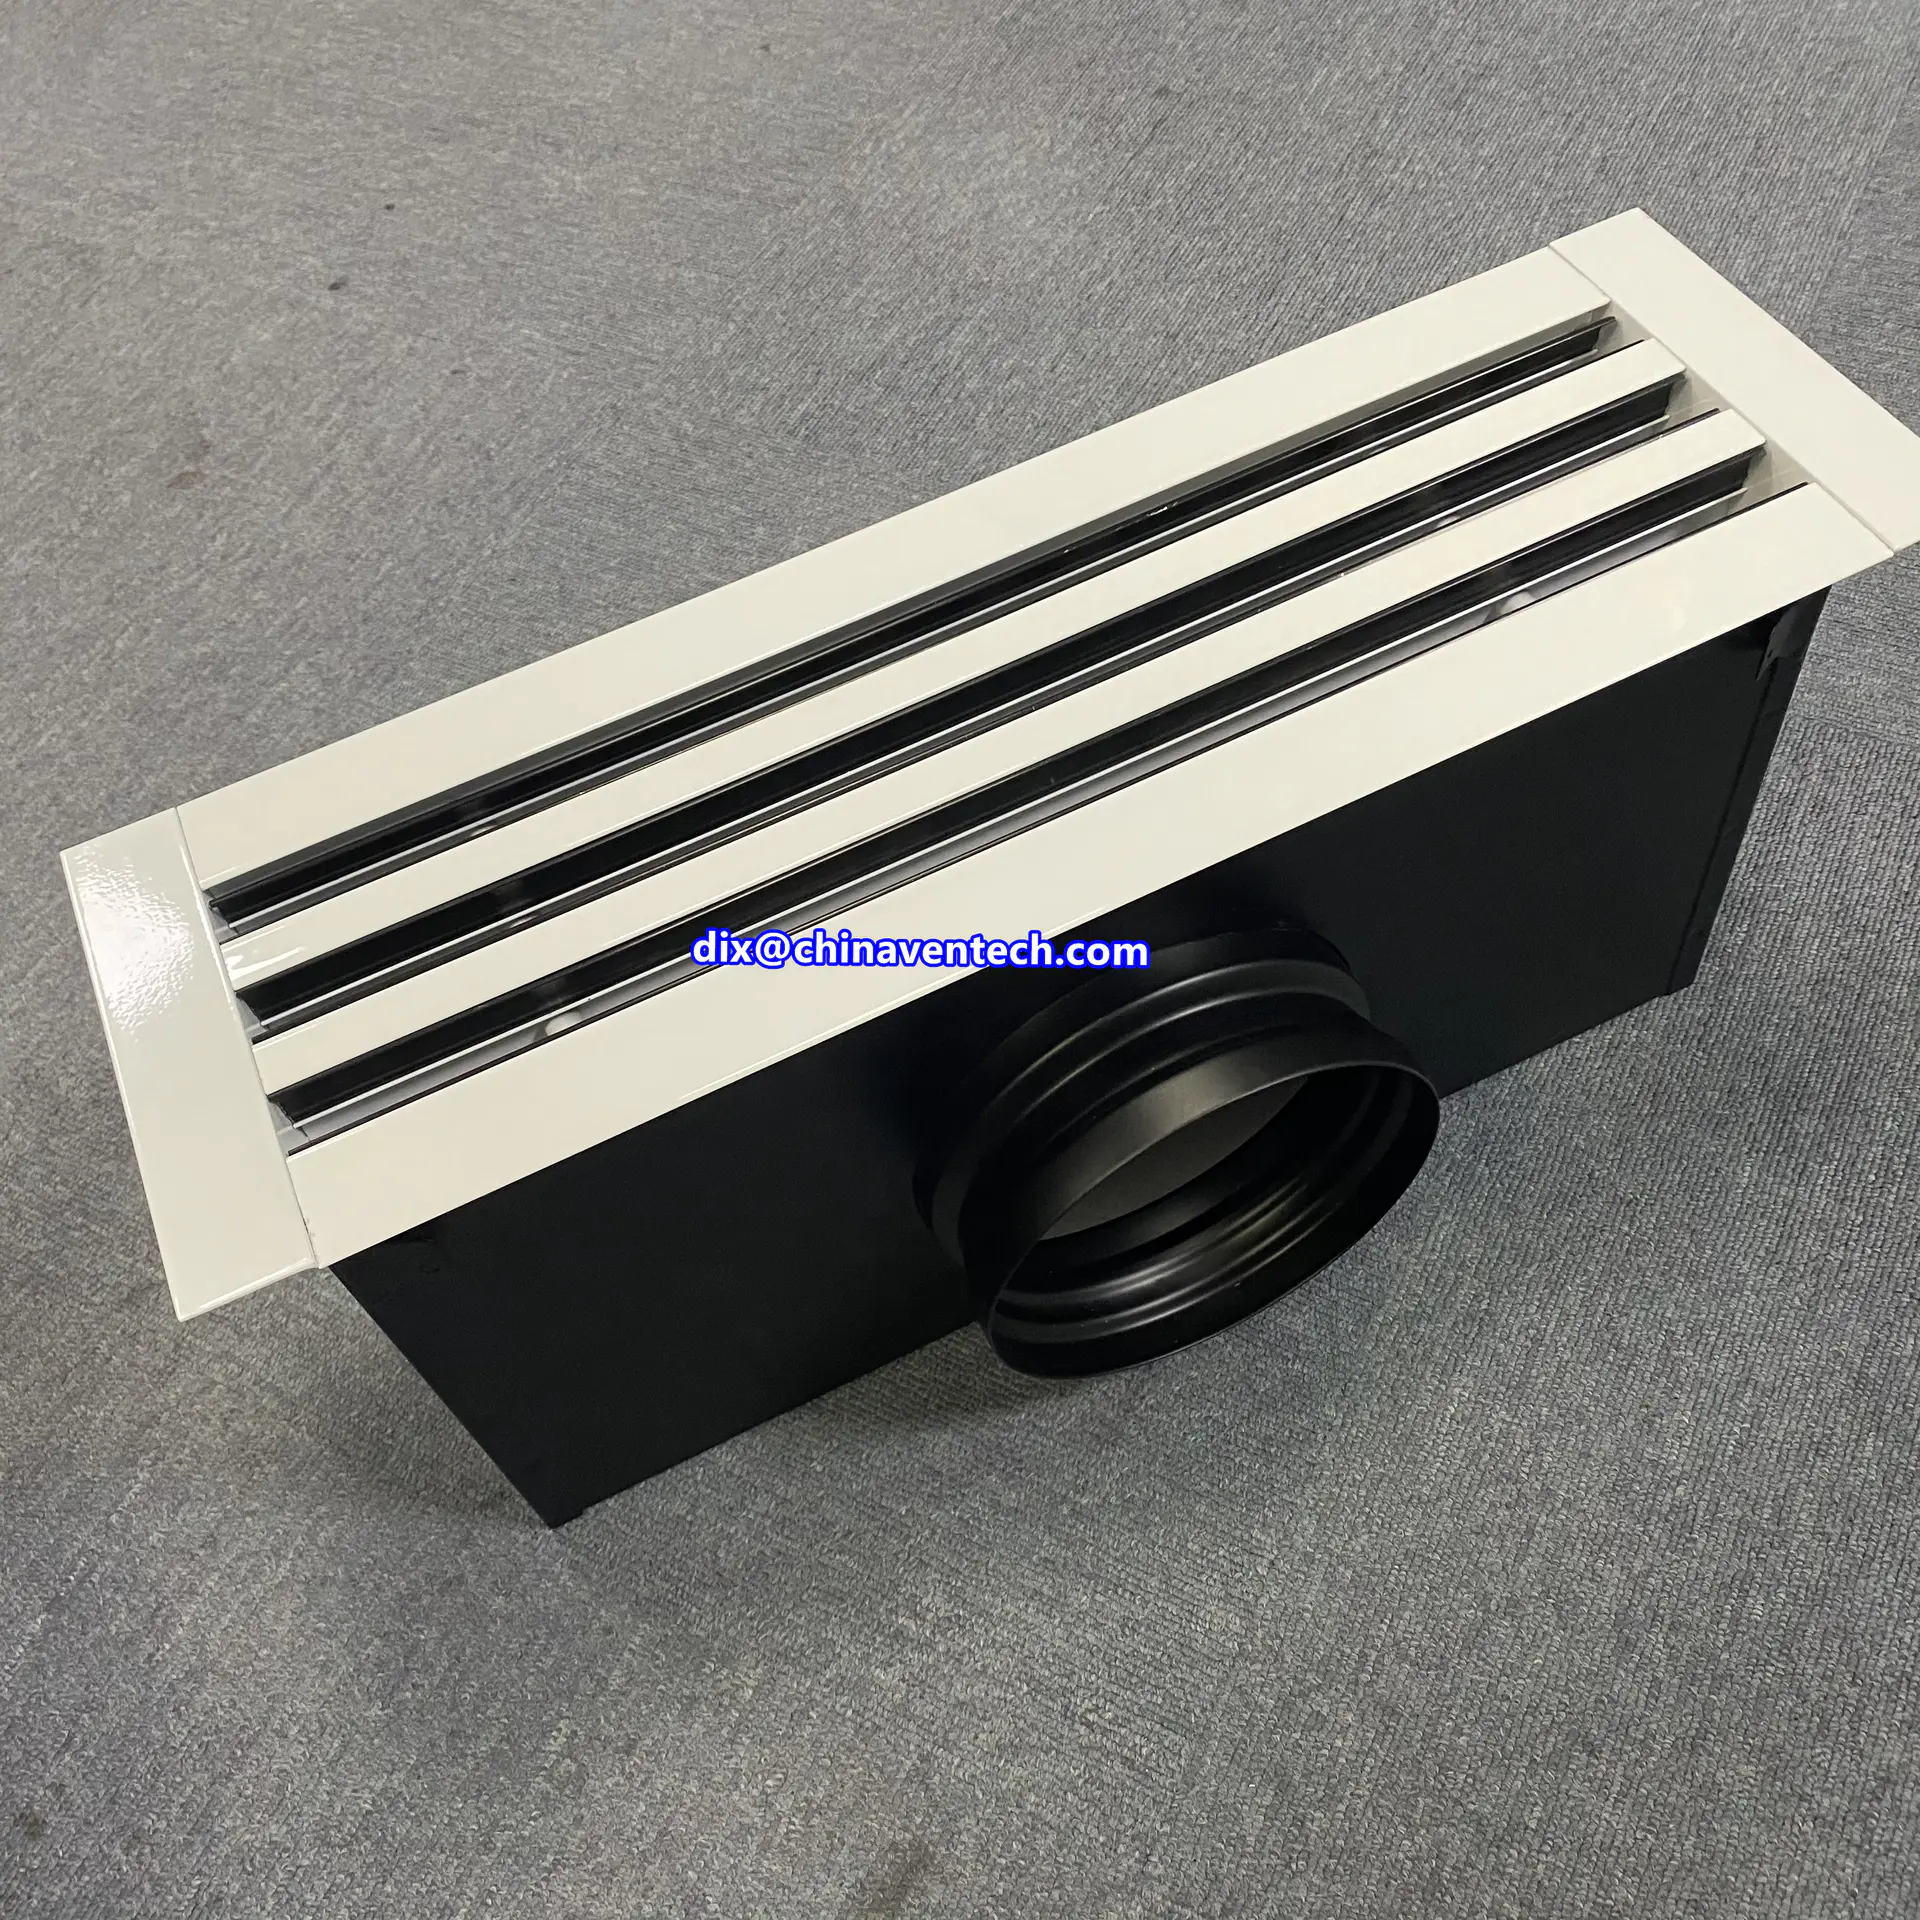 Modern design ceiling mounted linear slot air vent diffuser with 8\